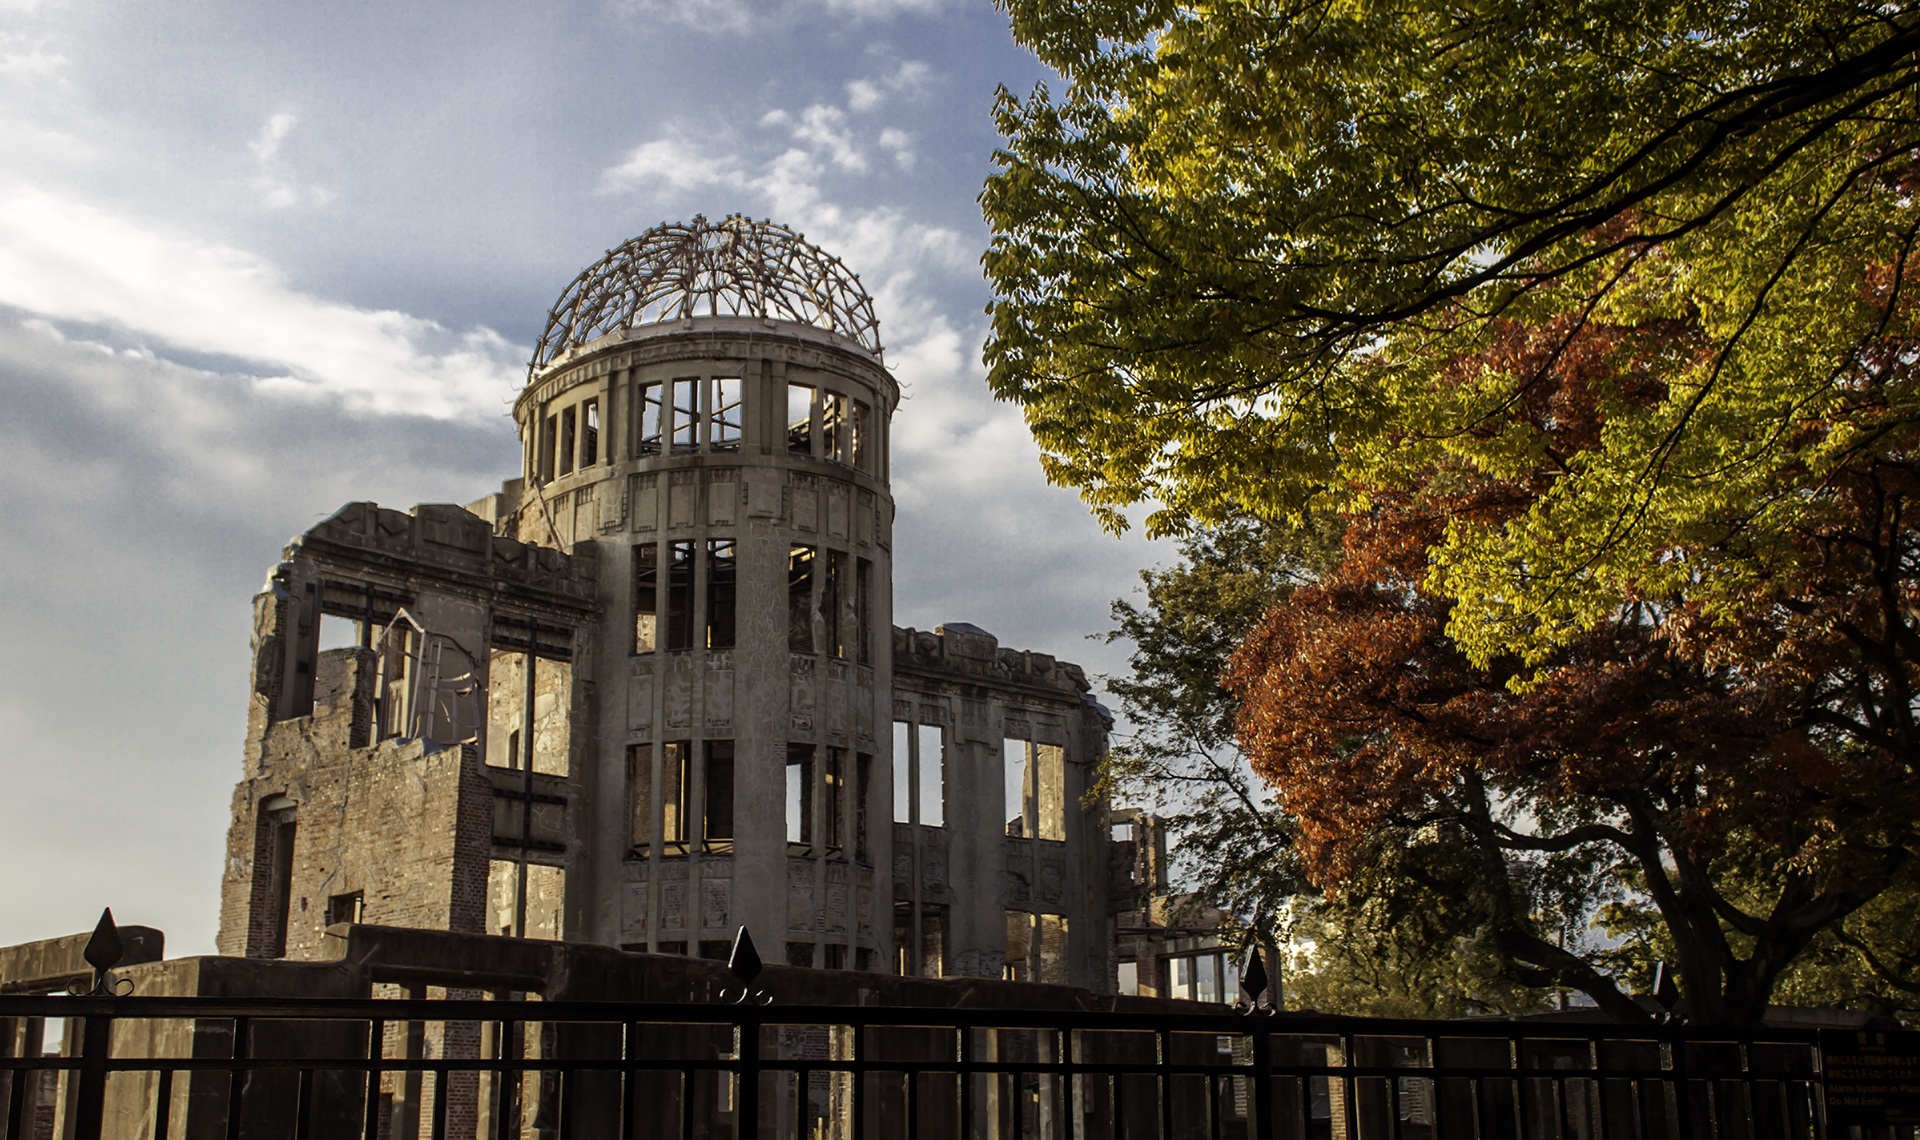 Photo - A view of the Atomic Bomb Dome in Hiroshima that survived a near-direct hit from the A-bomb blast in 1945 and still stands today. (Credit: Max Pixel)